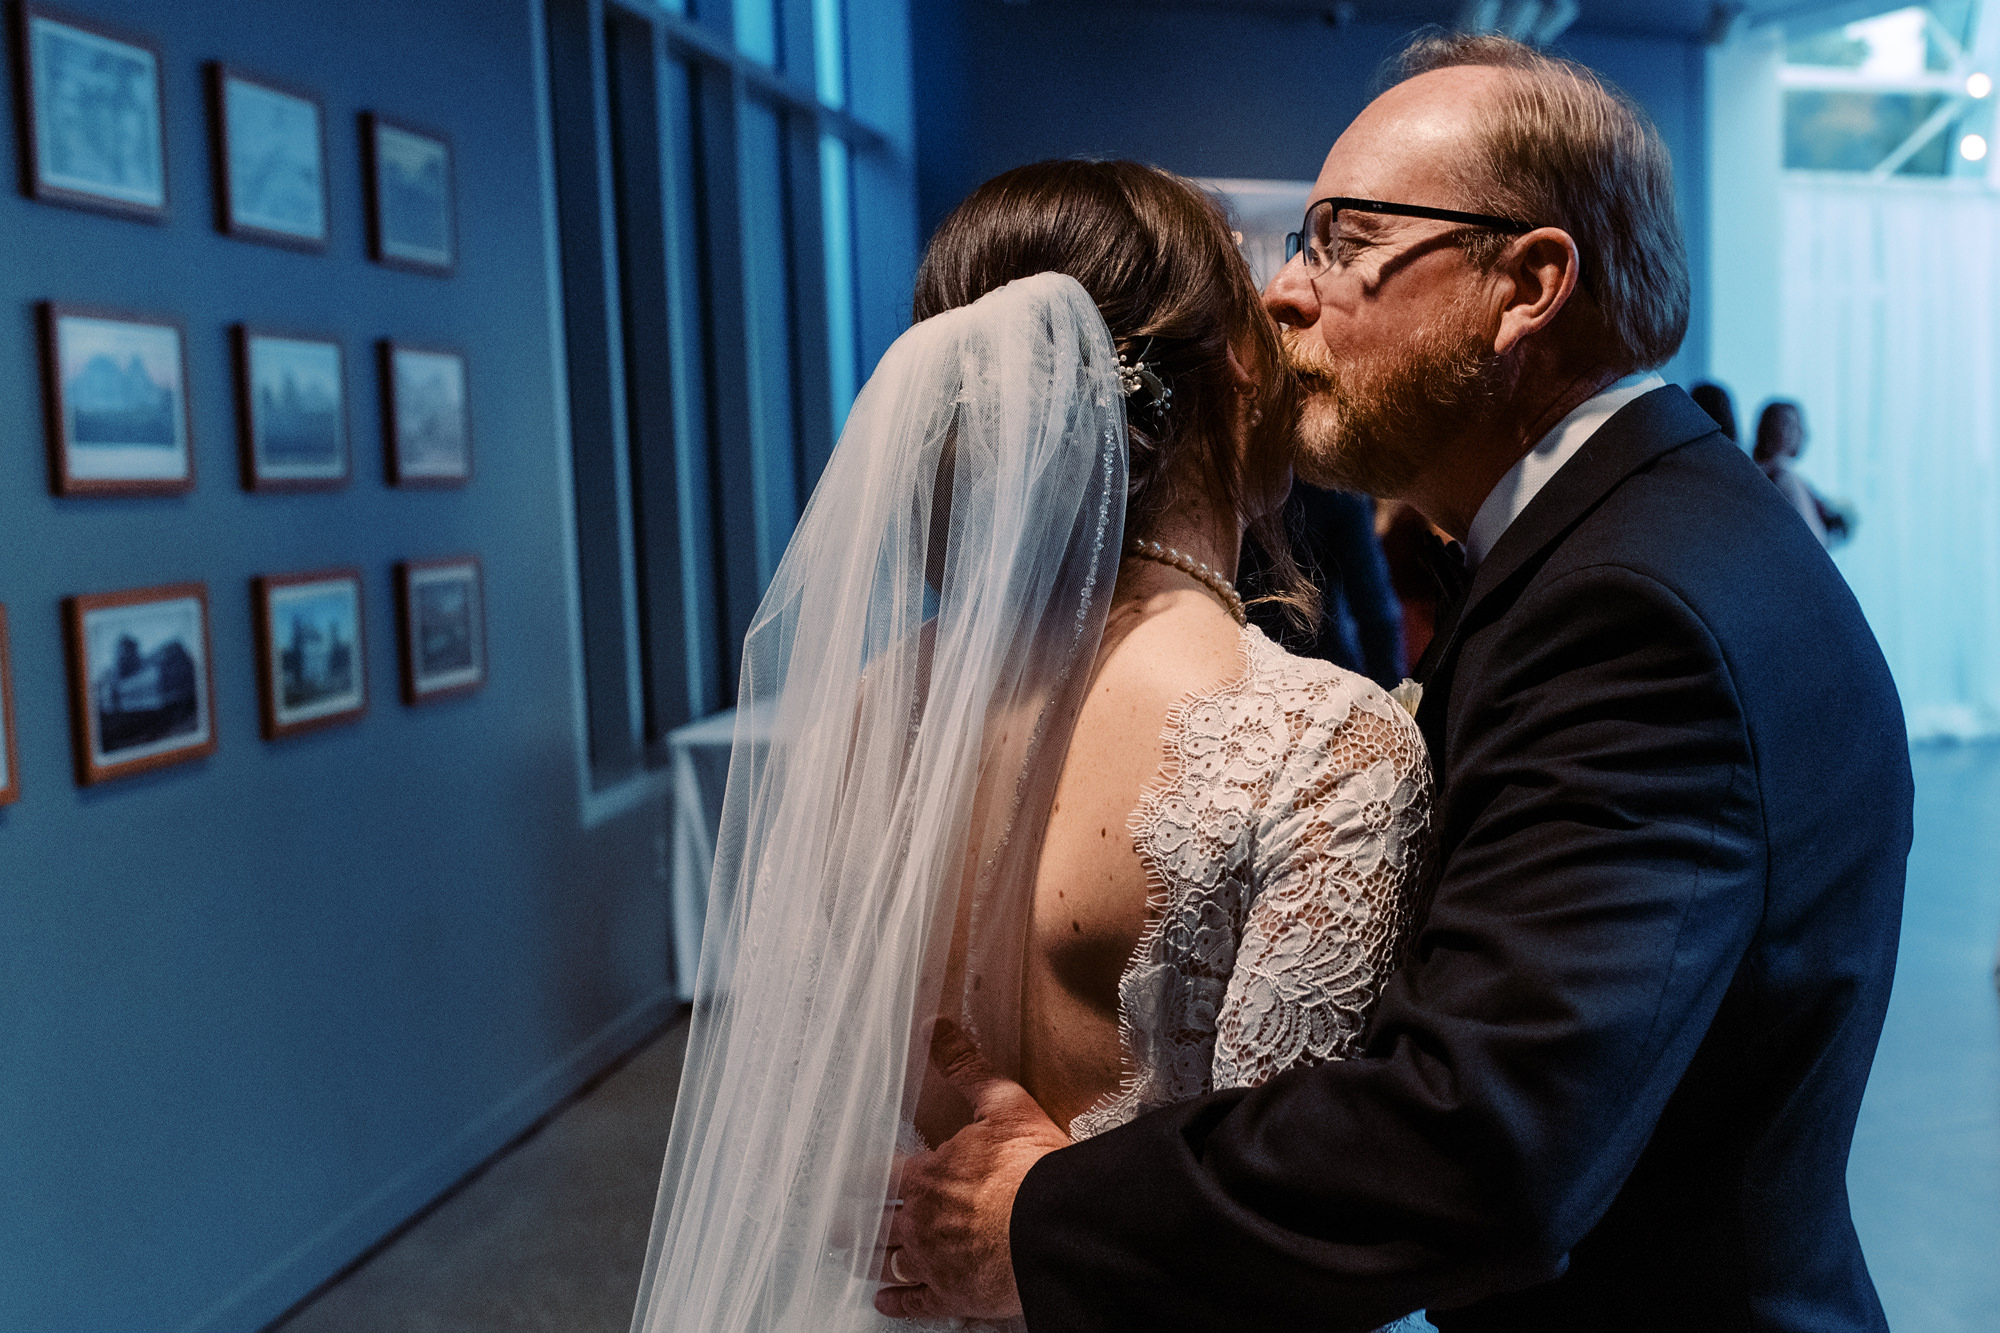 Bride and father share a moment before walking down the aisle